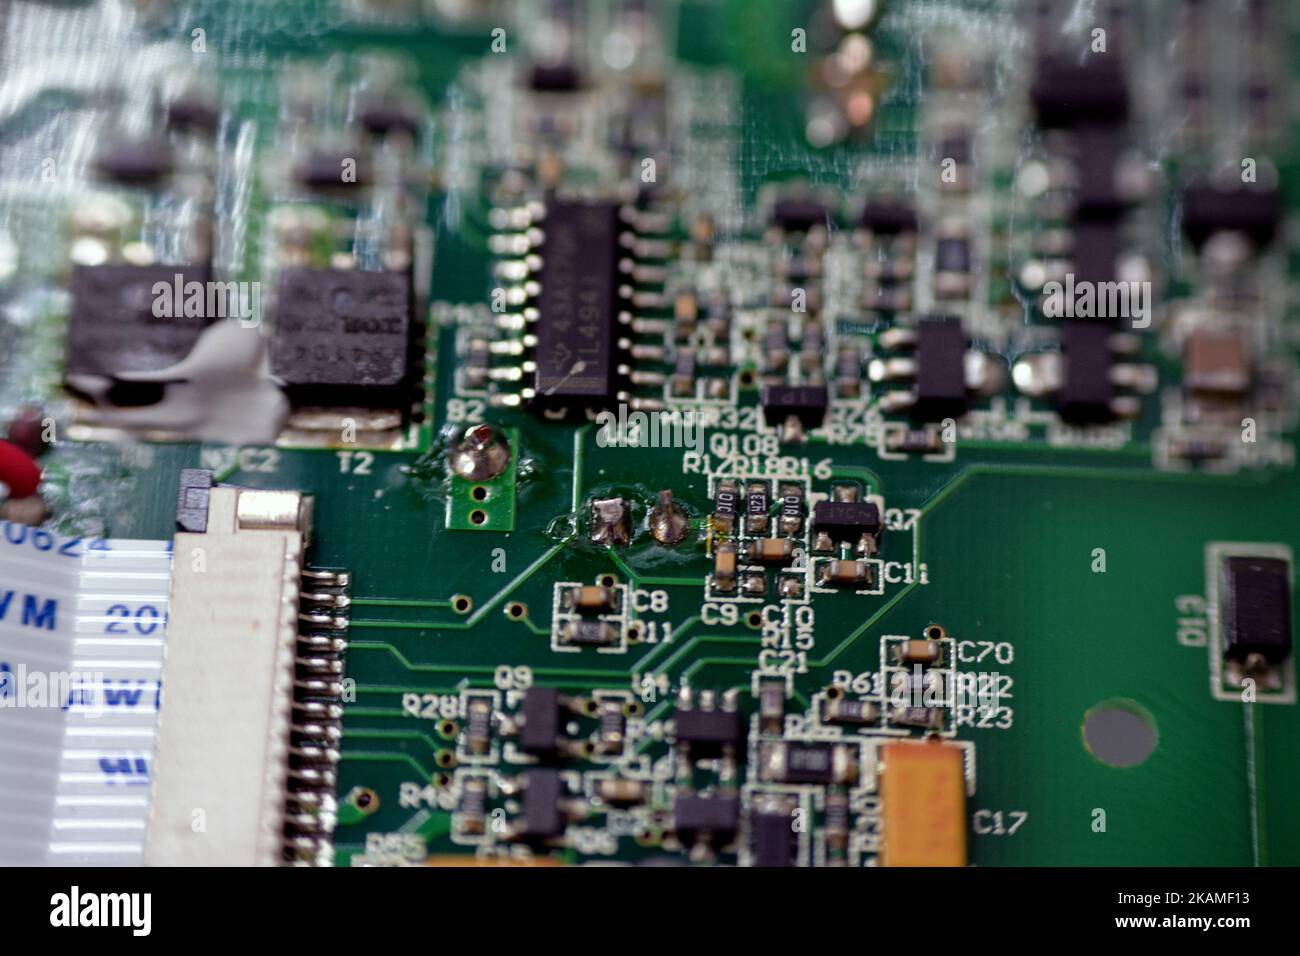 Cairo, Egypt, October 13 2022: A printed circuit board PCB, printed wiring board PWB, a medium used in electrical and electronic engineering to connec Stock Photo